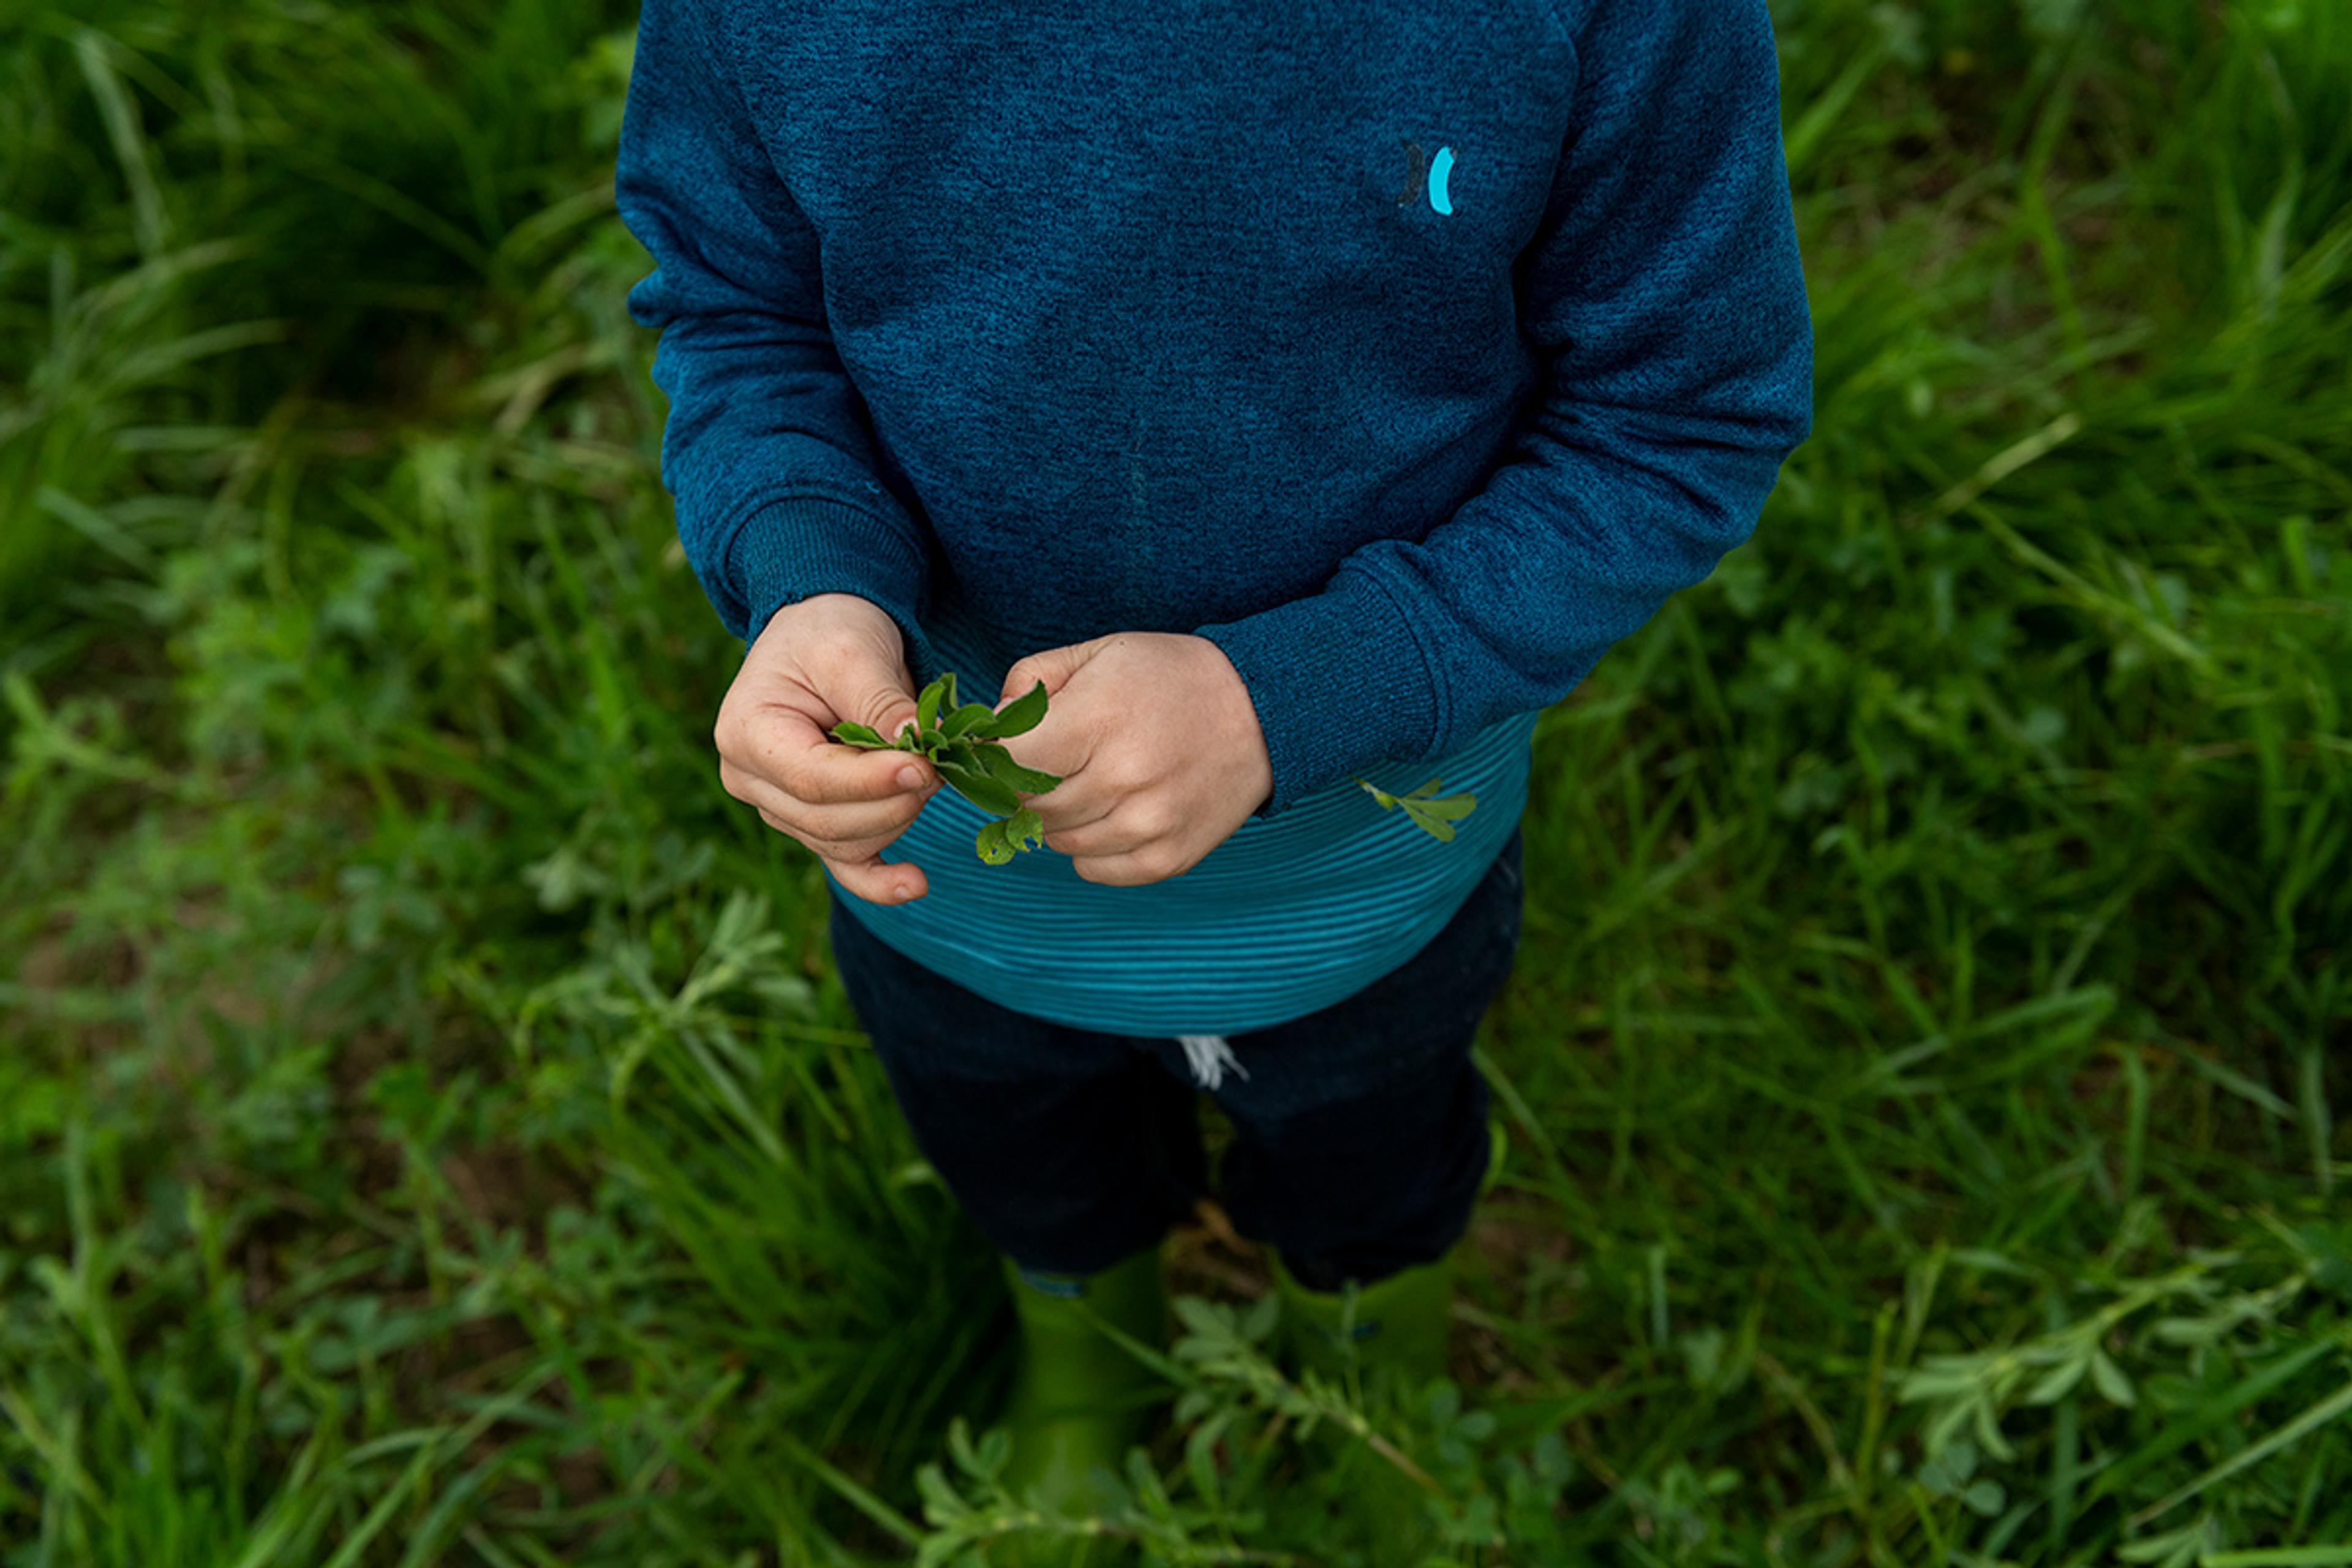 A view from above of a child’s hands holding some green pasture grass, with a field of grass surrounding them.